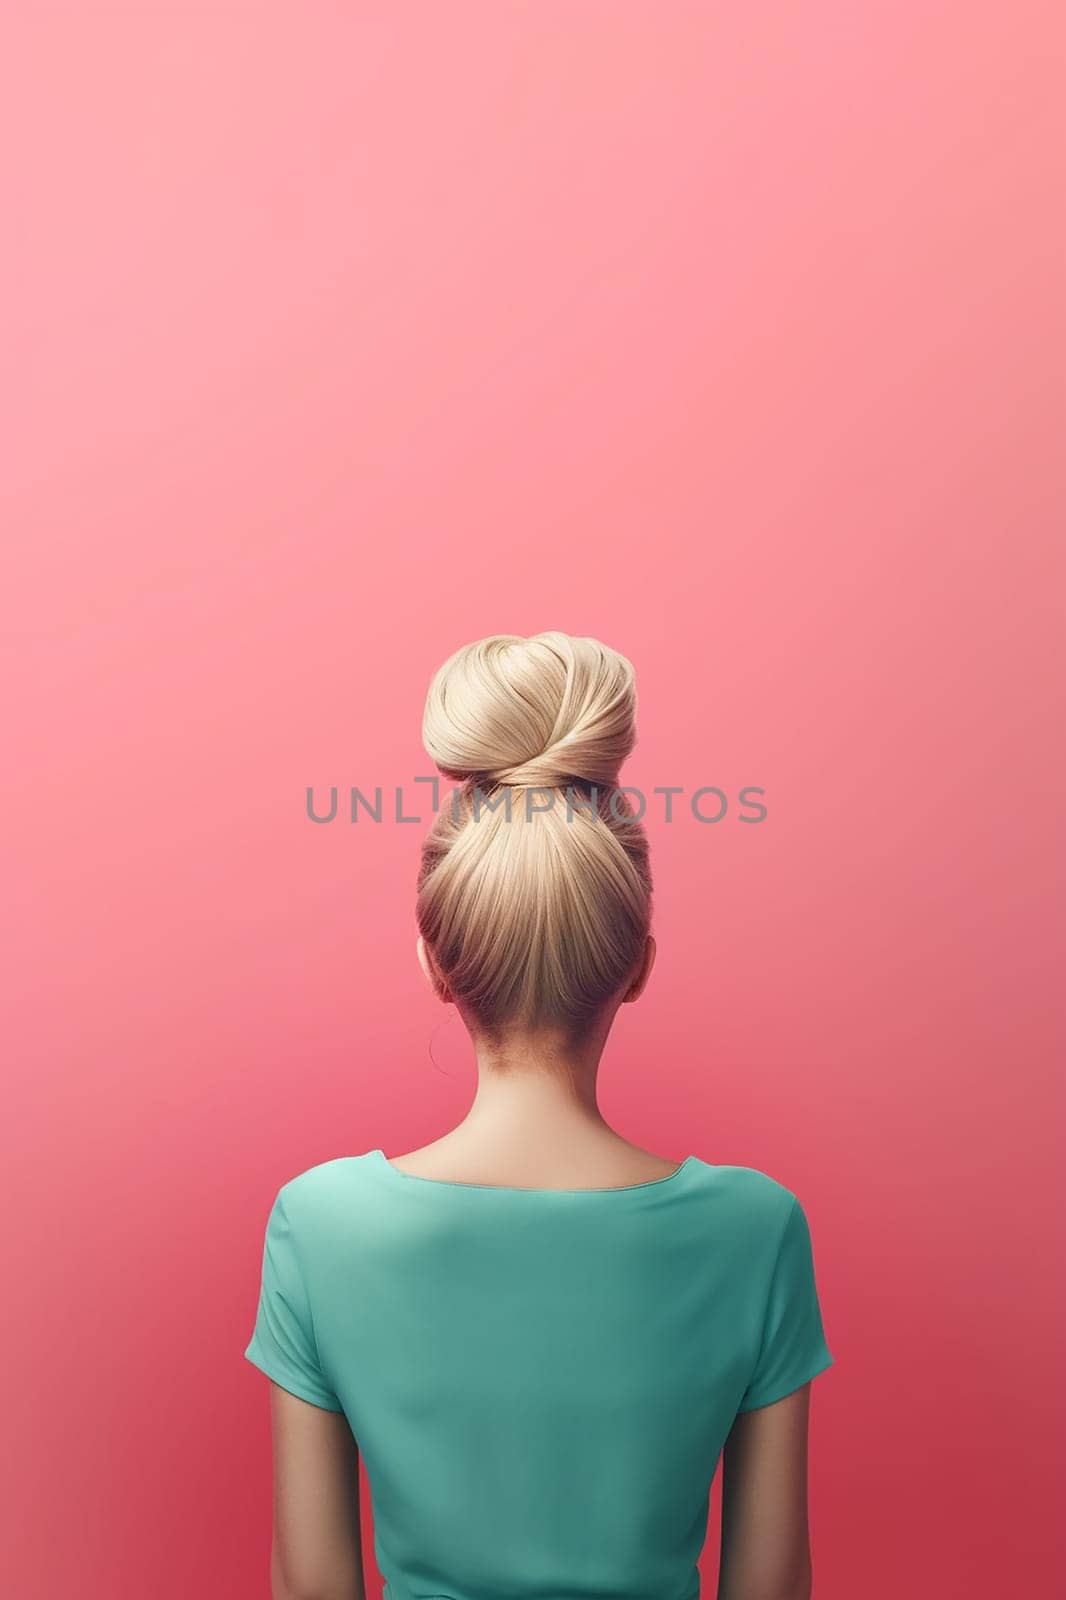 Woman with bun hairstyle facing a pink background.